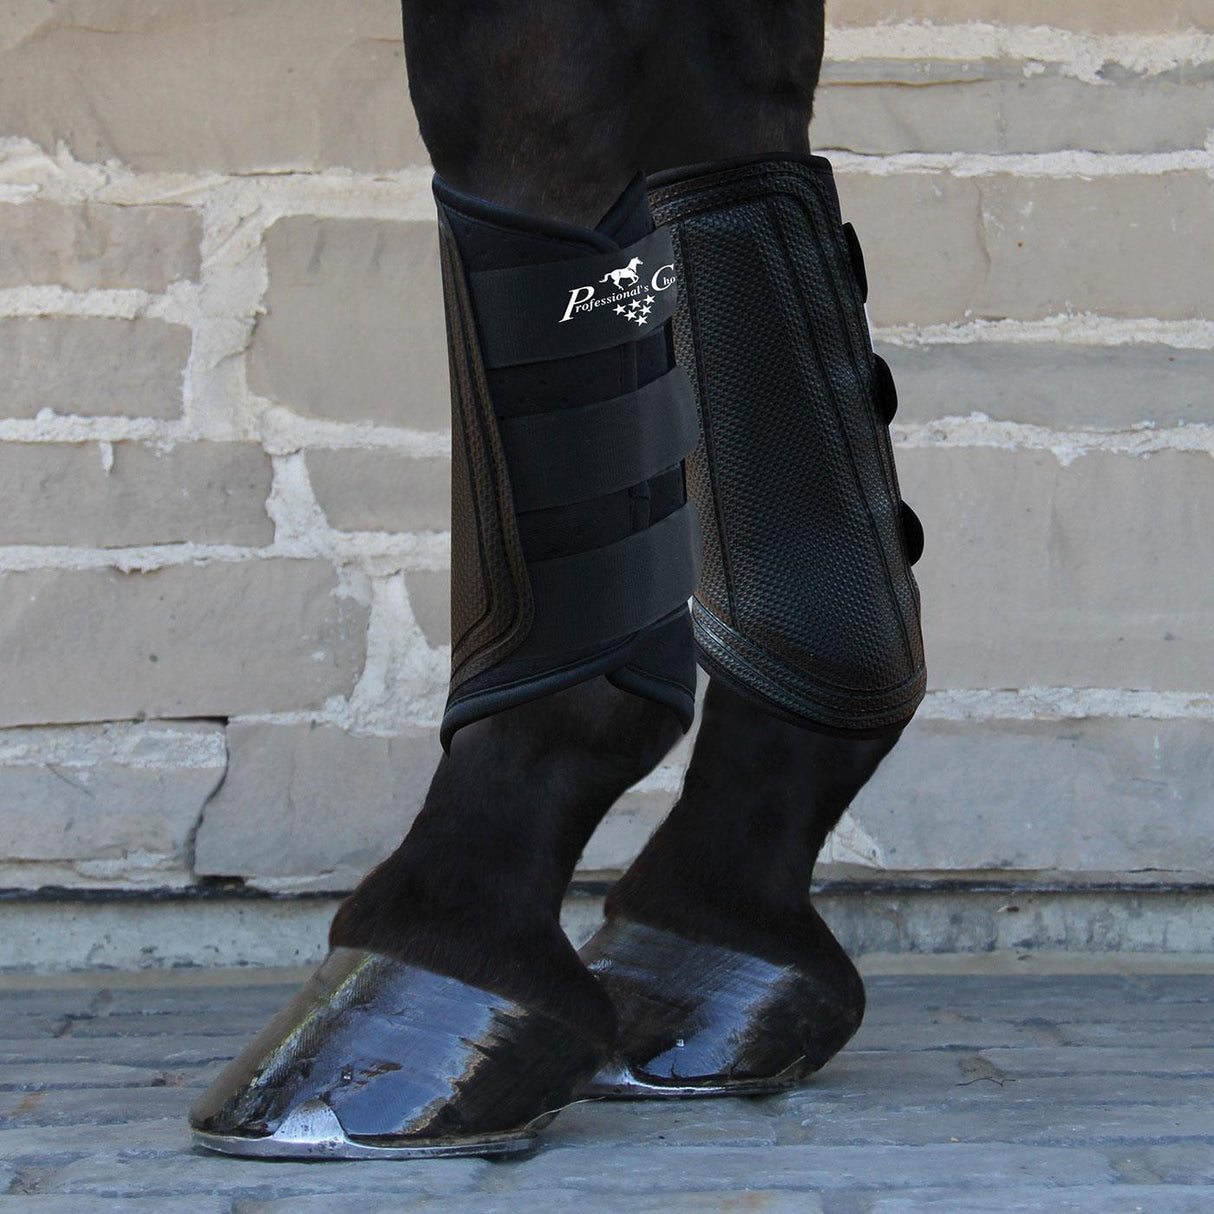 Professional's Choice VenTech All Purpose Boots